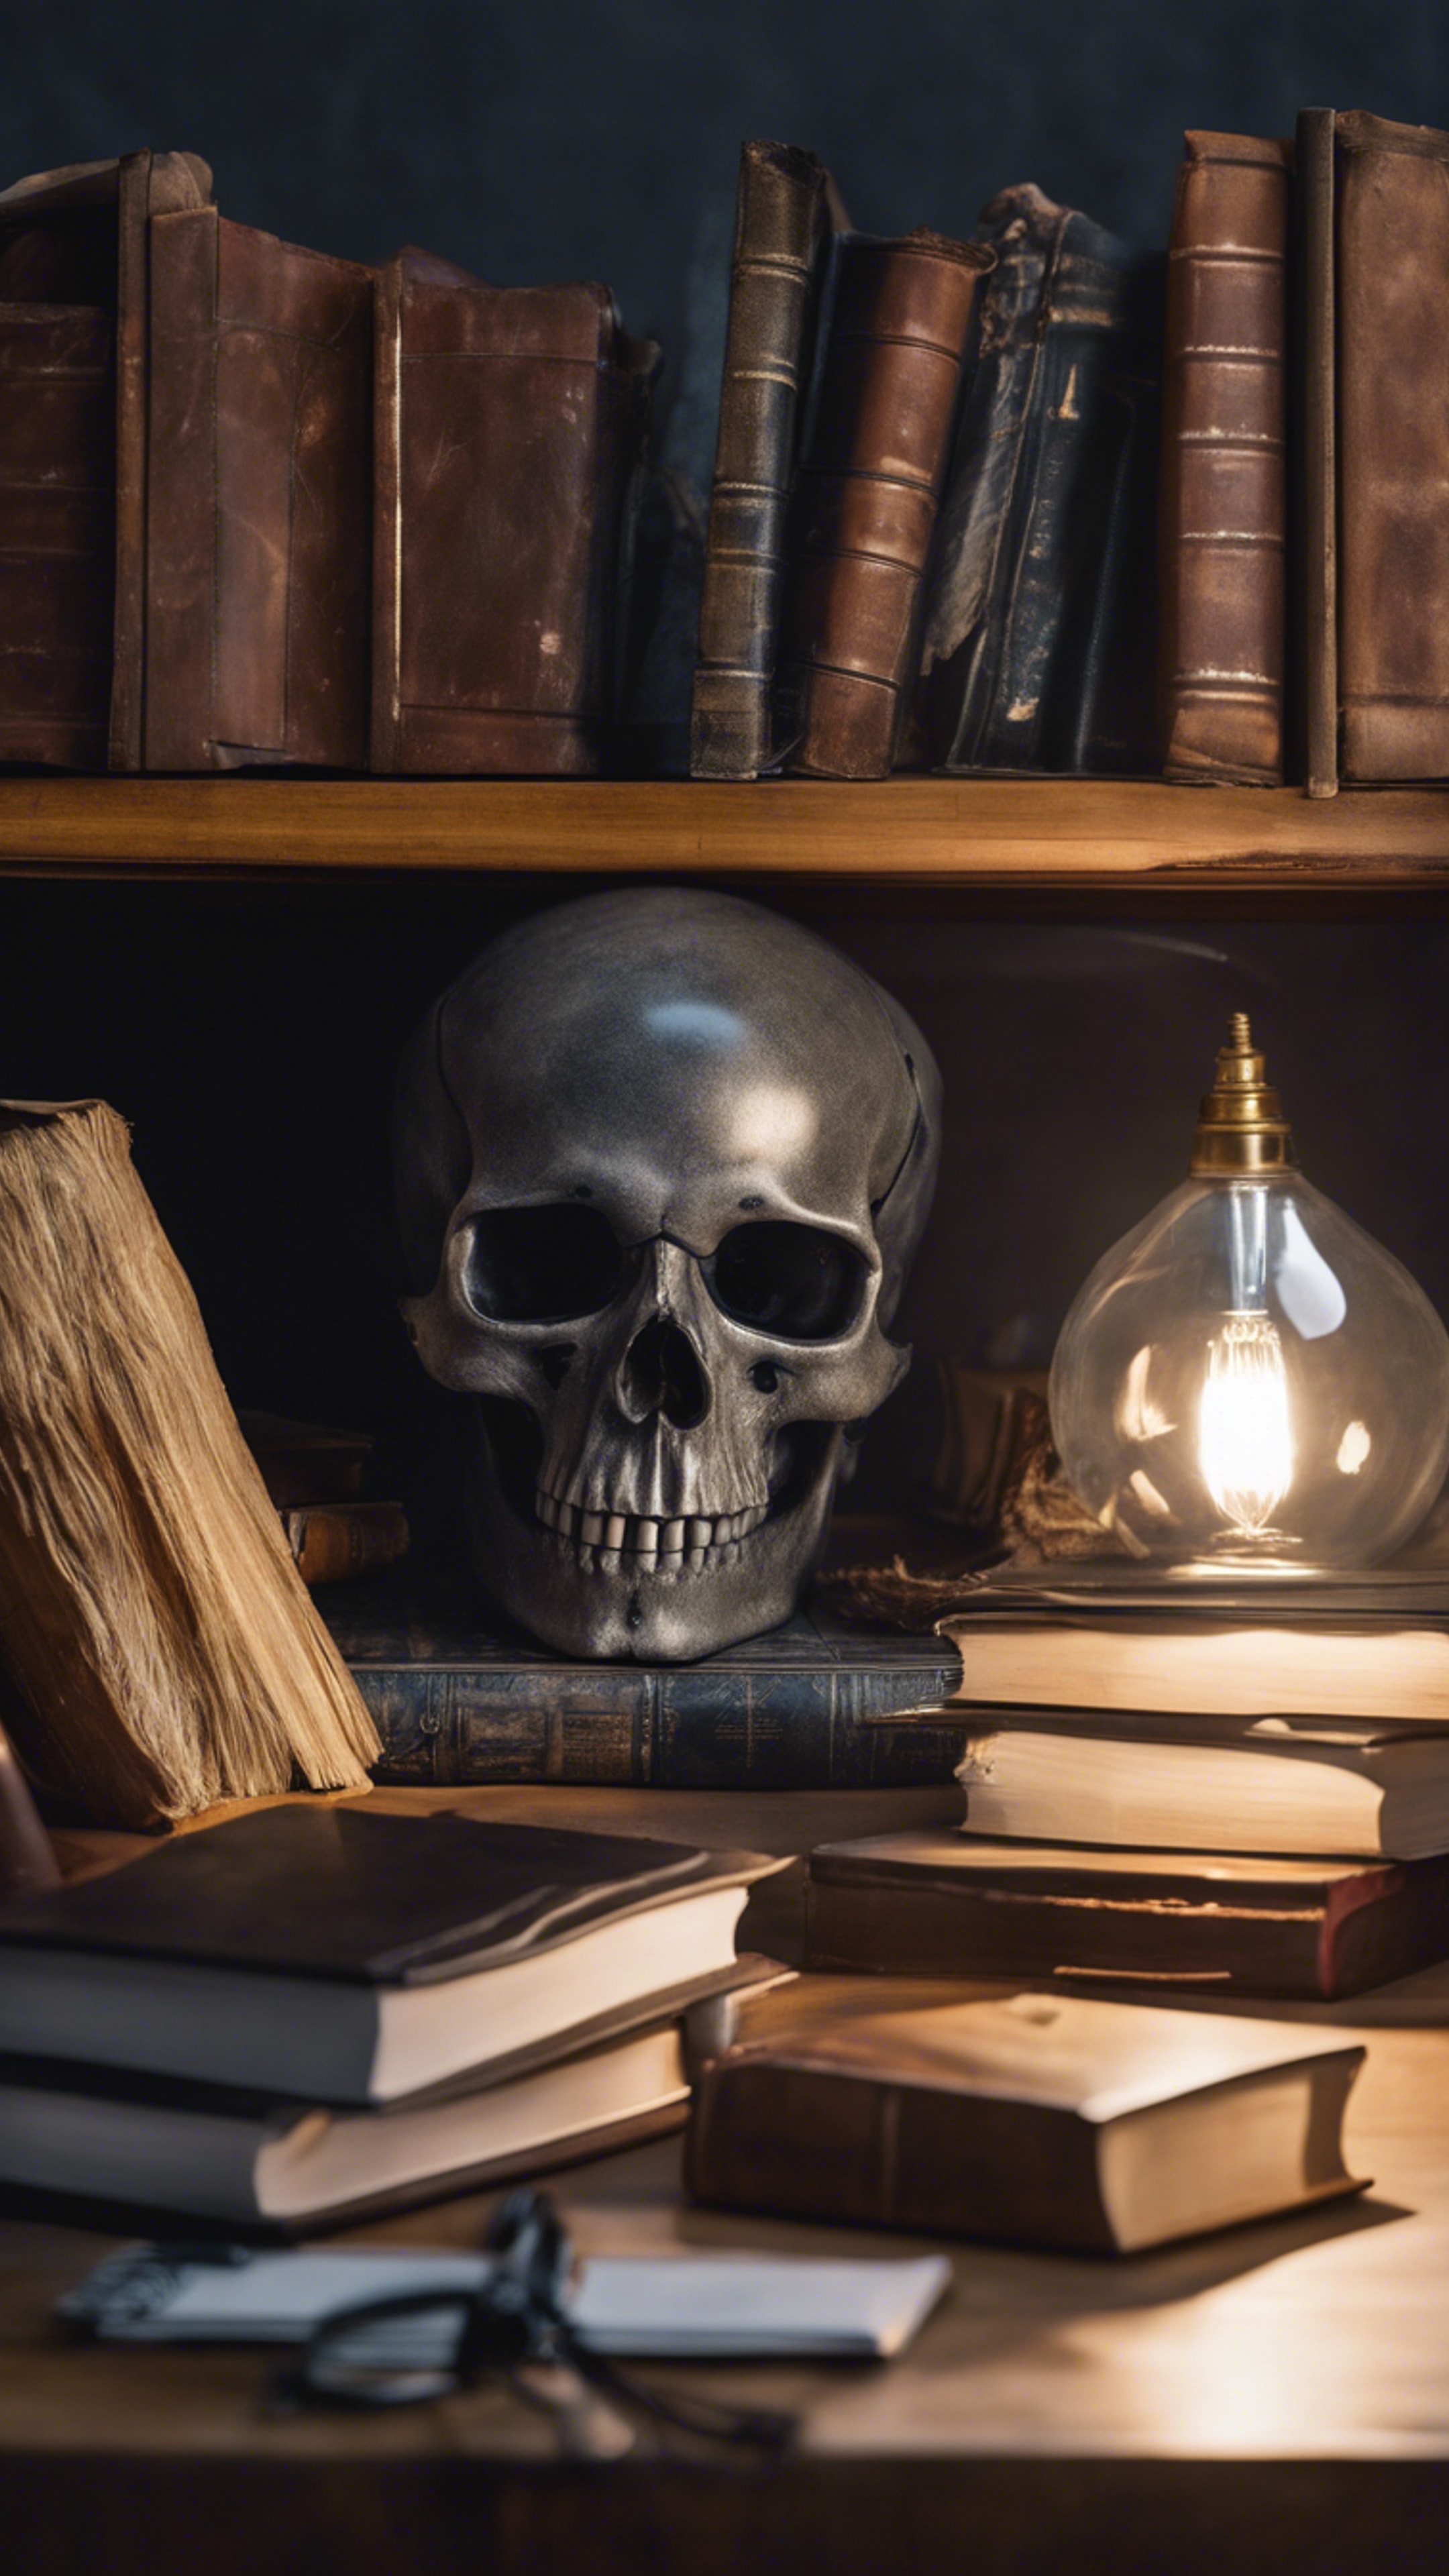 A study desk with a gray skull paperweight, surrounded by scattered books and a dimly lit lamp. Обои[9ada7a5adc764debb4f2]